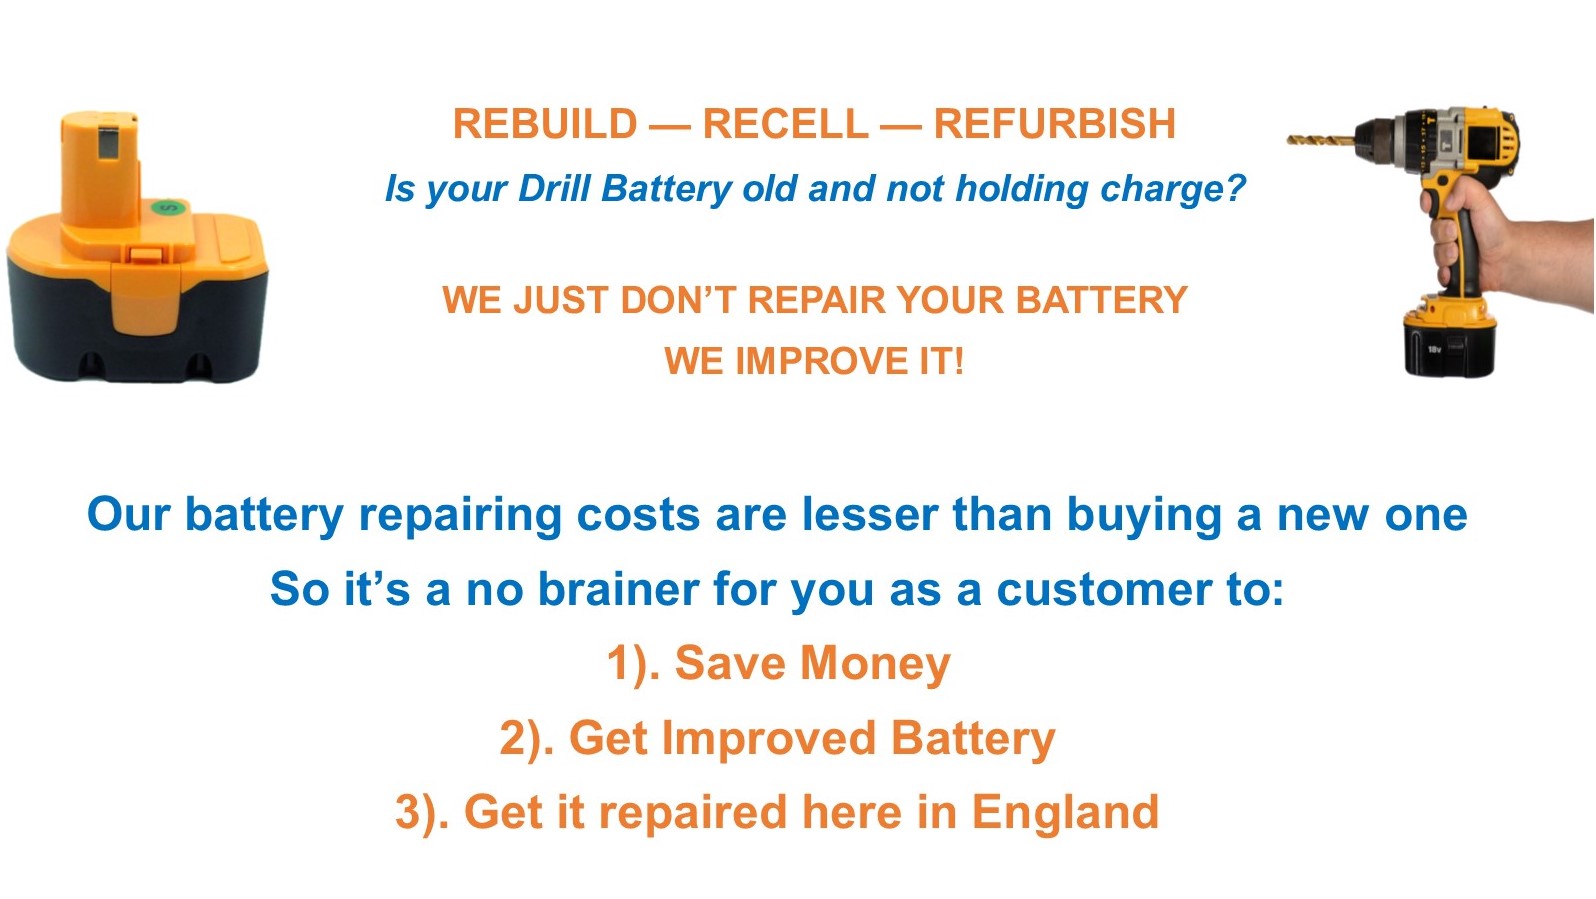 How do you find the correct replacement battery for your drill?